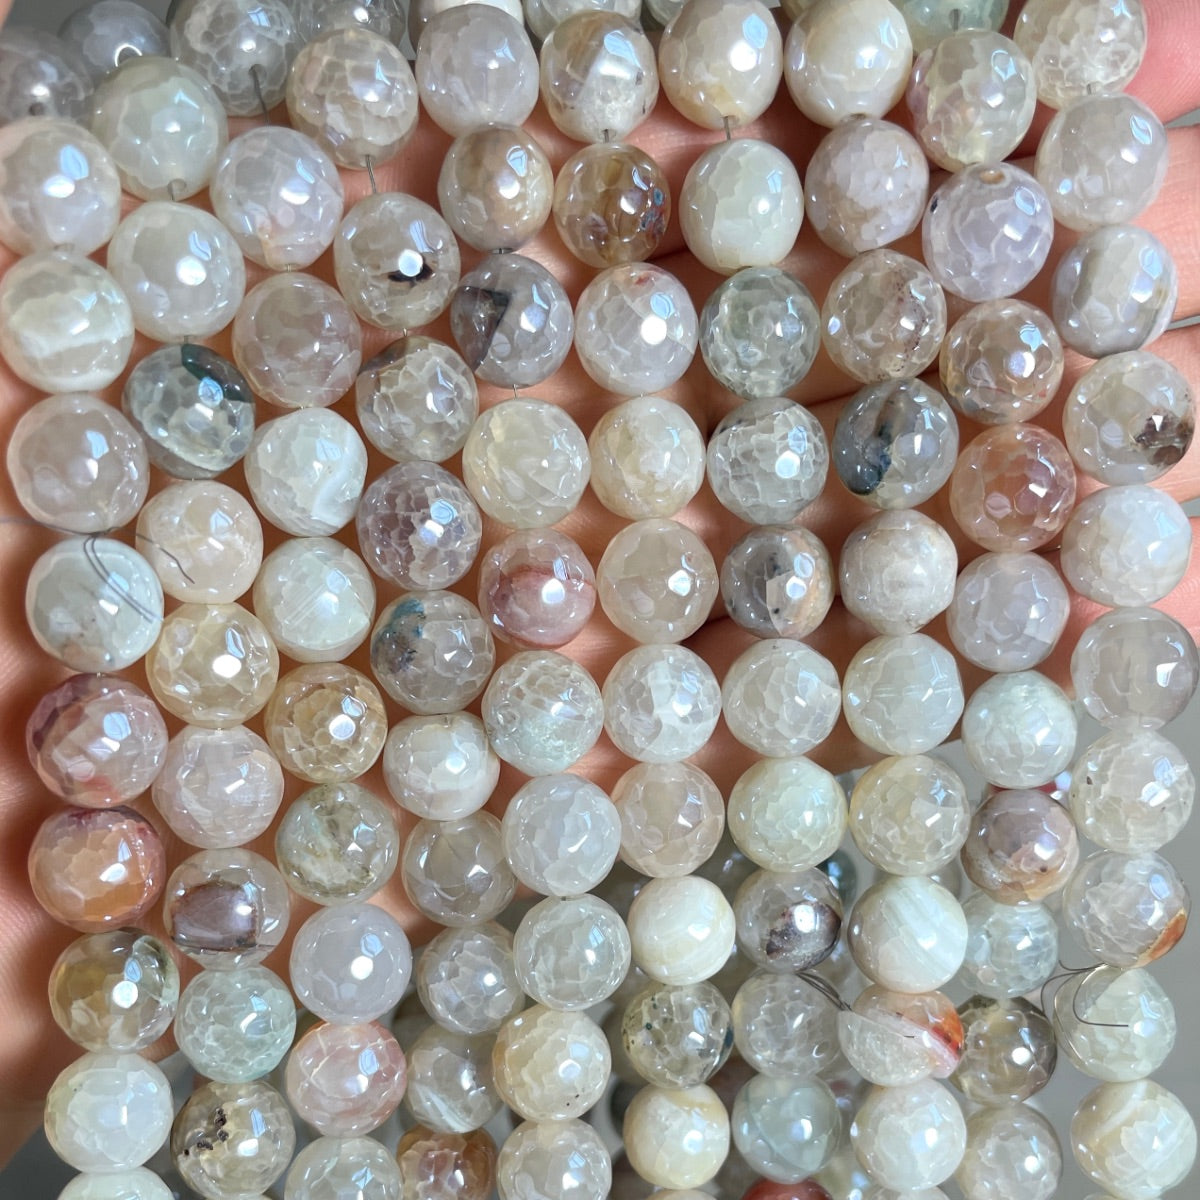 2 Strands/lot 10mm Electroplated AB White Agate Faceted Stone Beads Electroplated Beads Electroplated Faceted Agate Beads New Beads Arrivals Charms Beads Beyond